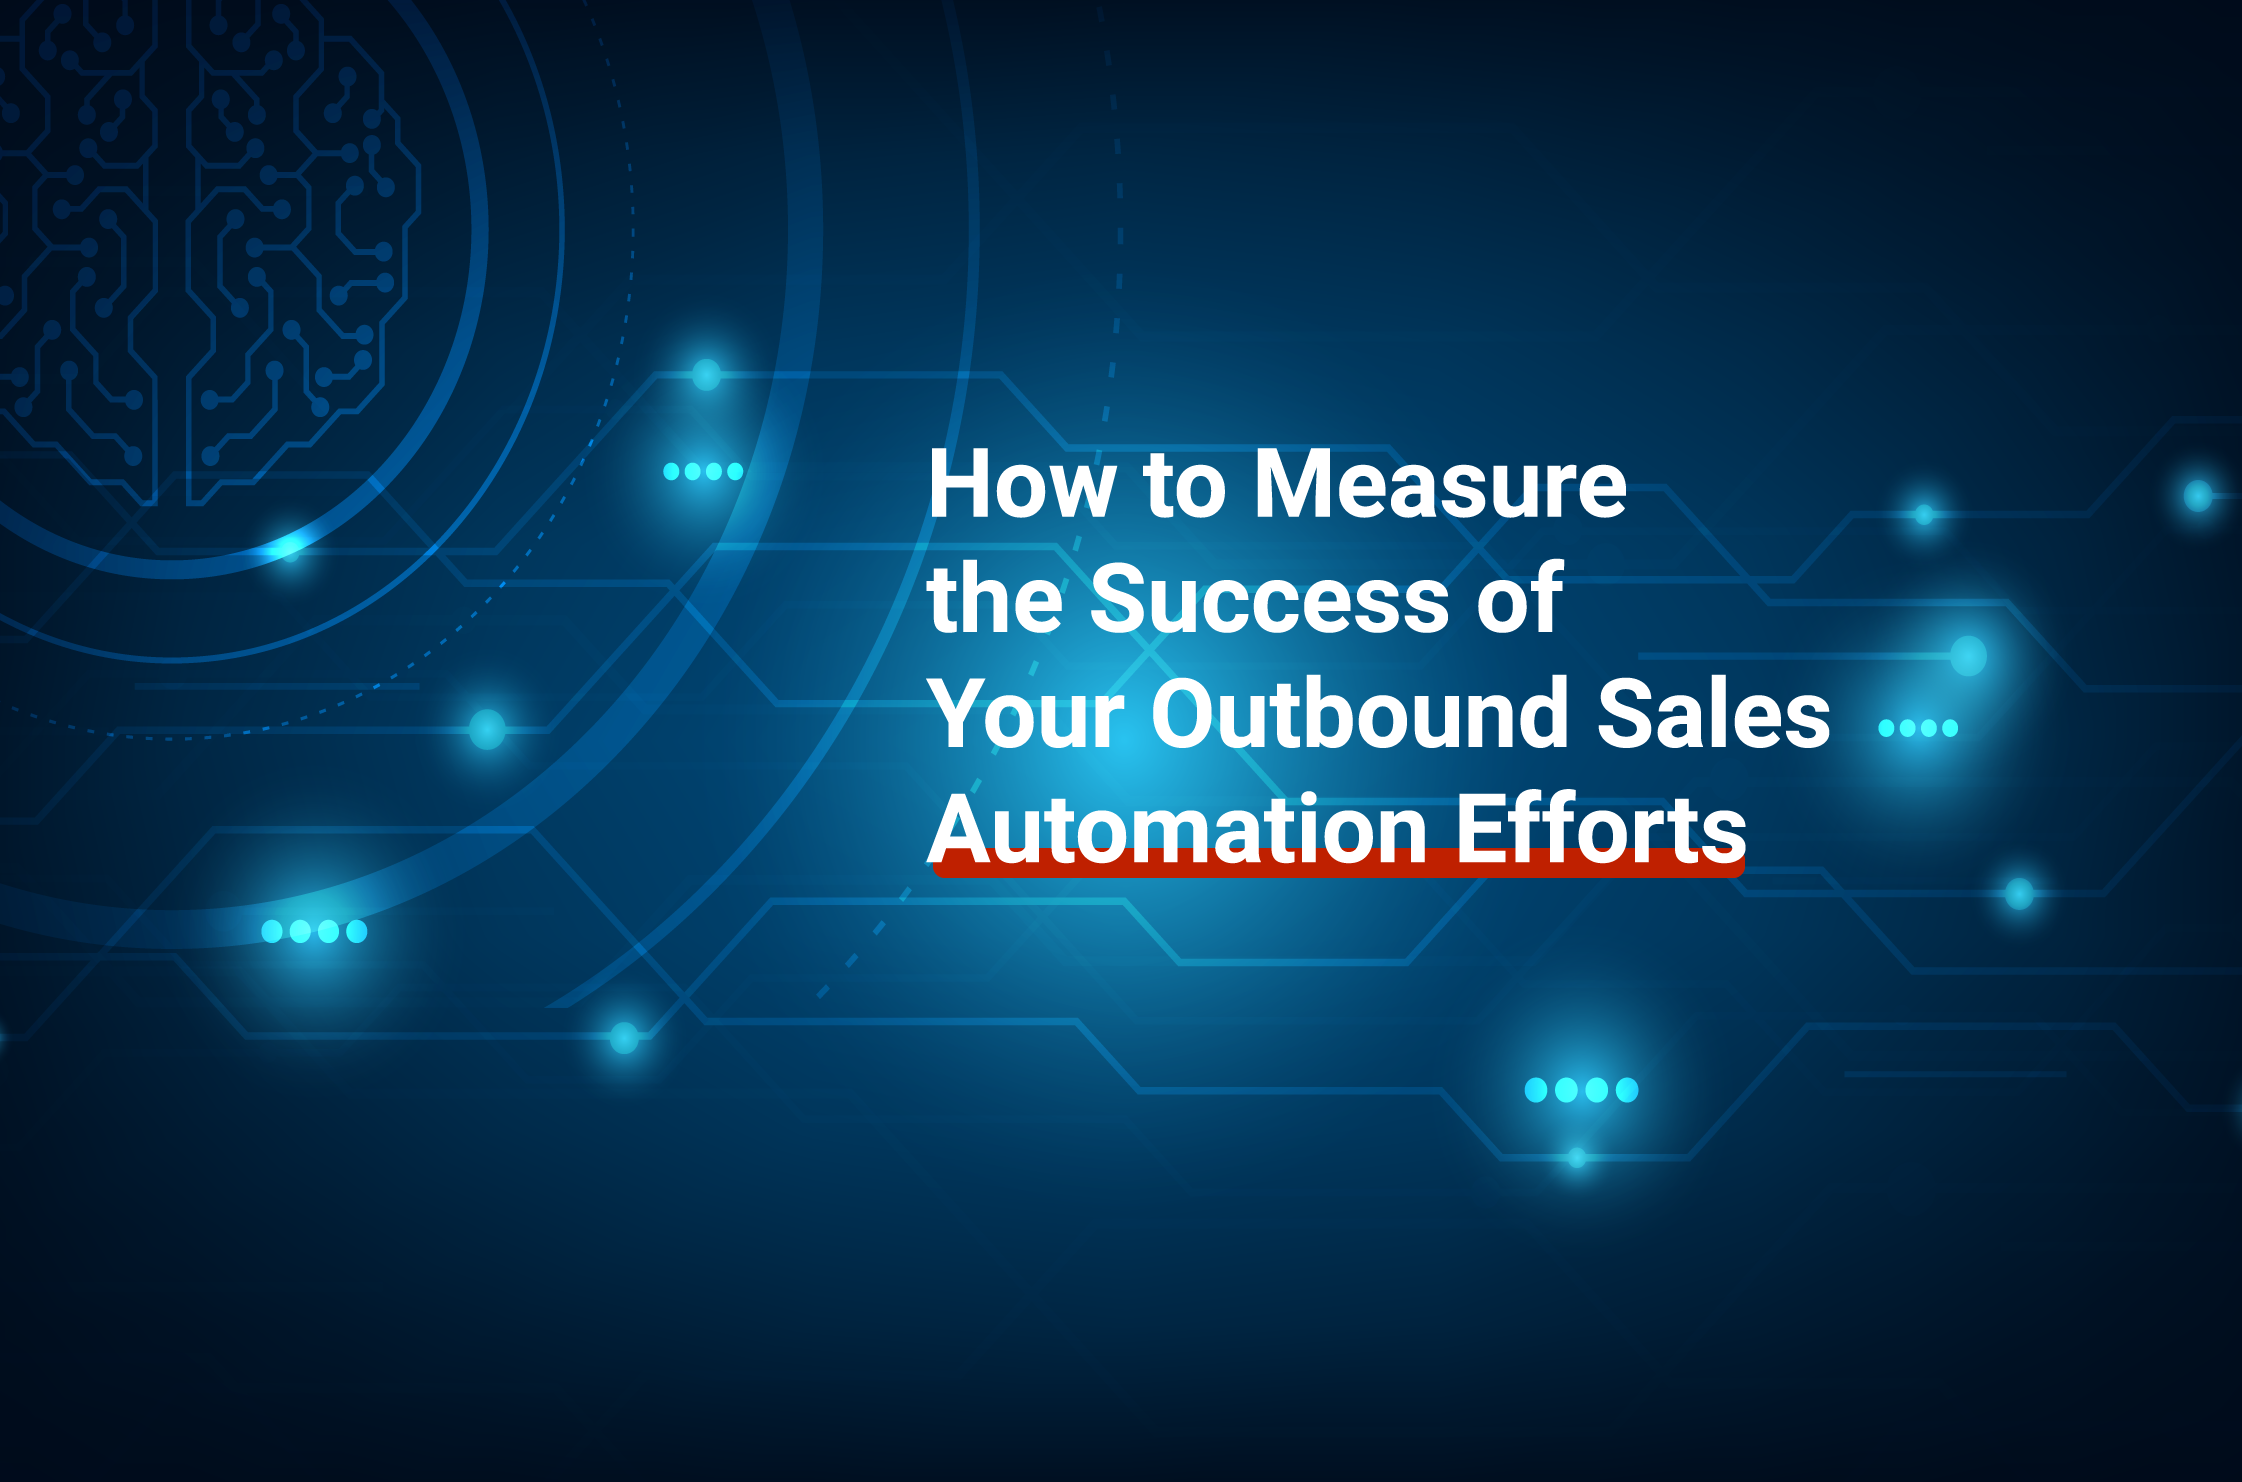 How to Measure the Success of Your Outbound Sales Automation Efforts